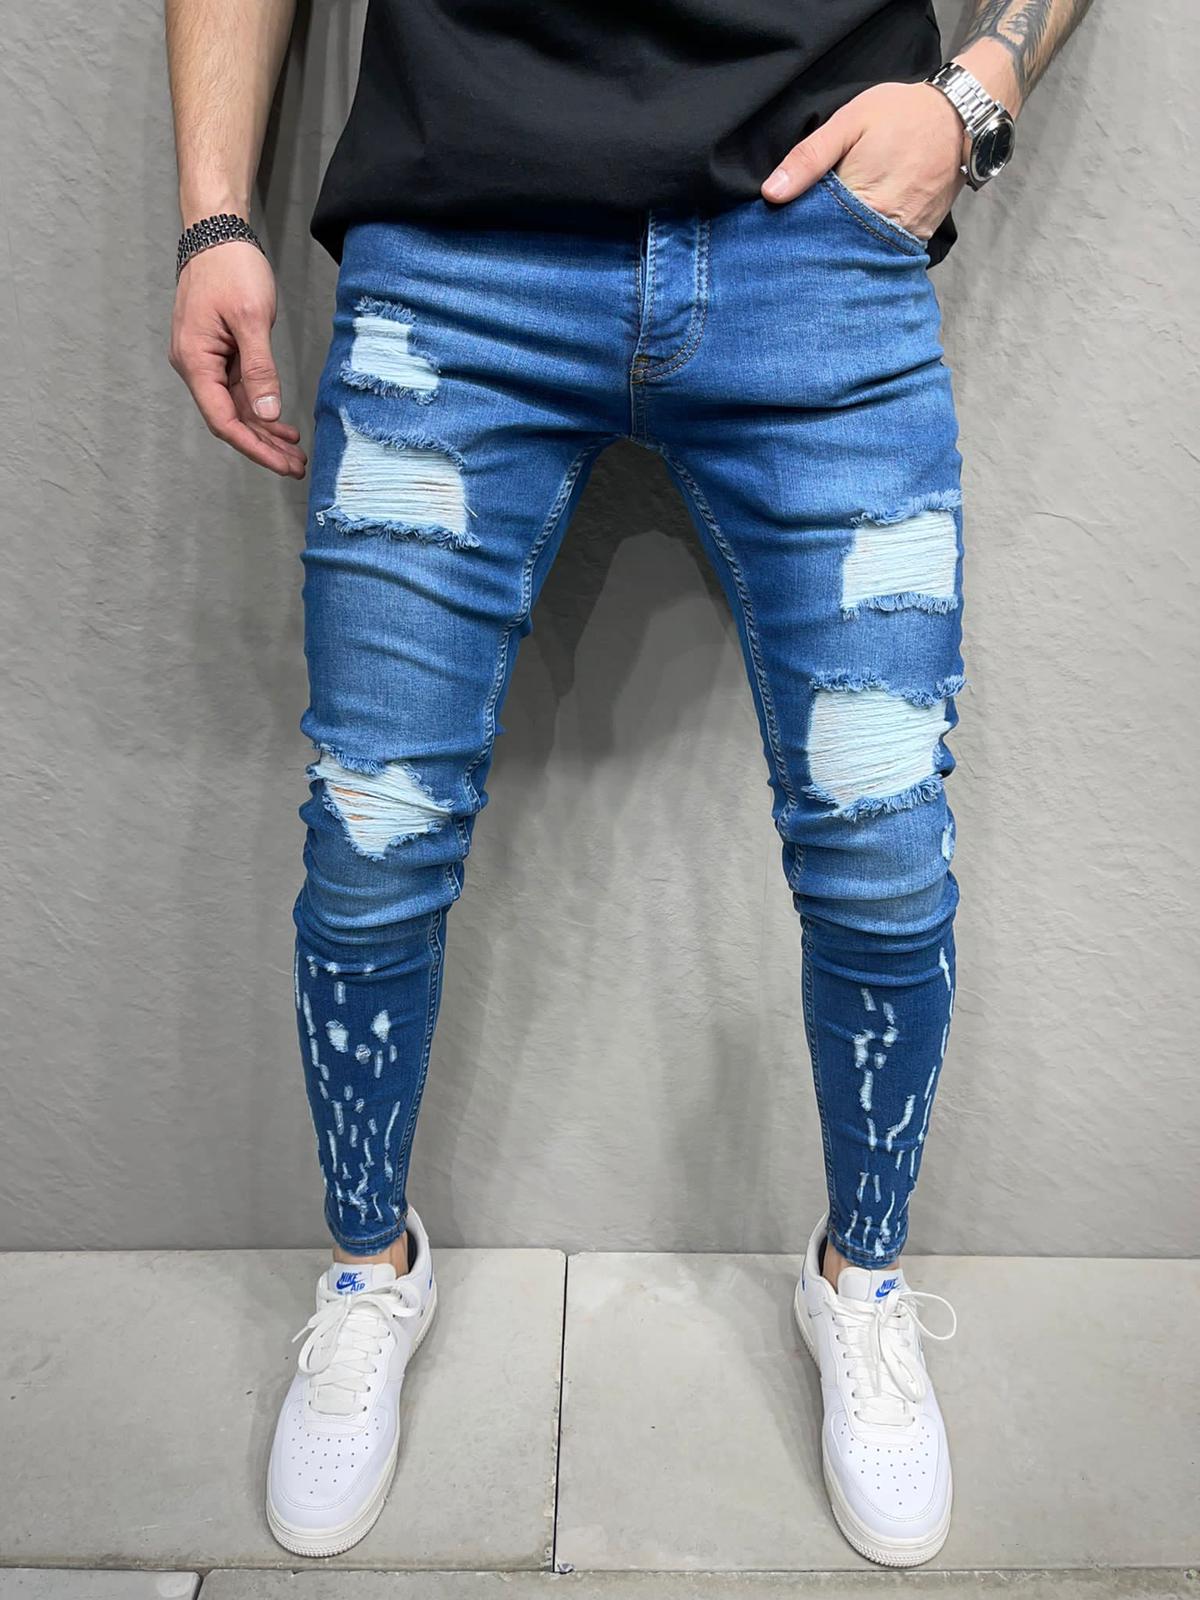 Wirt Skinny Ankle Ripped Jeans - Blue Y11